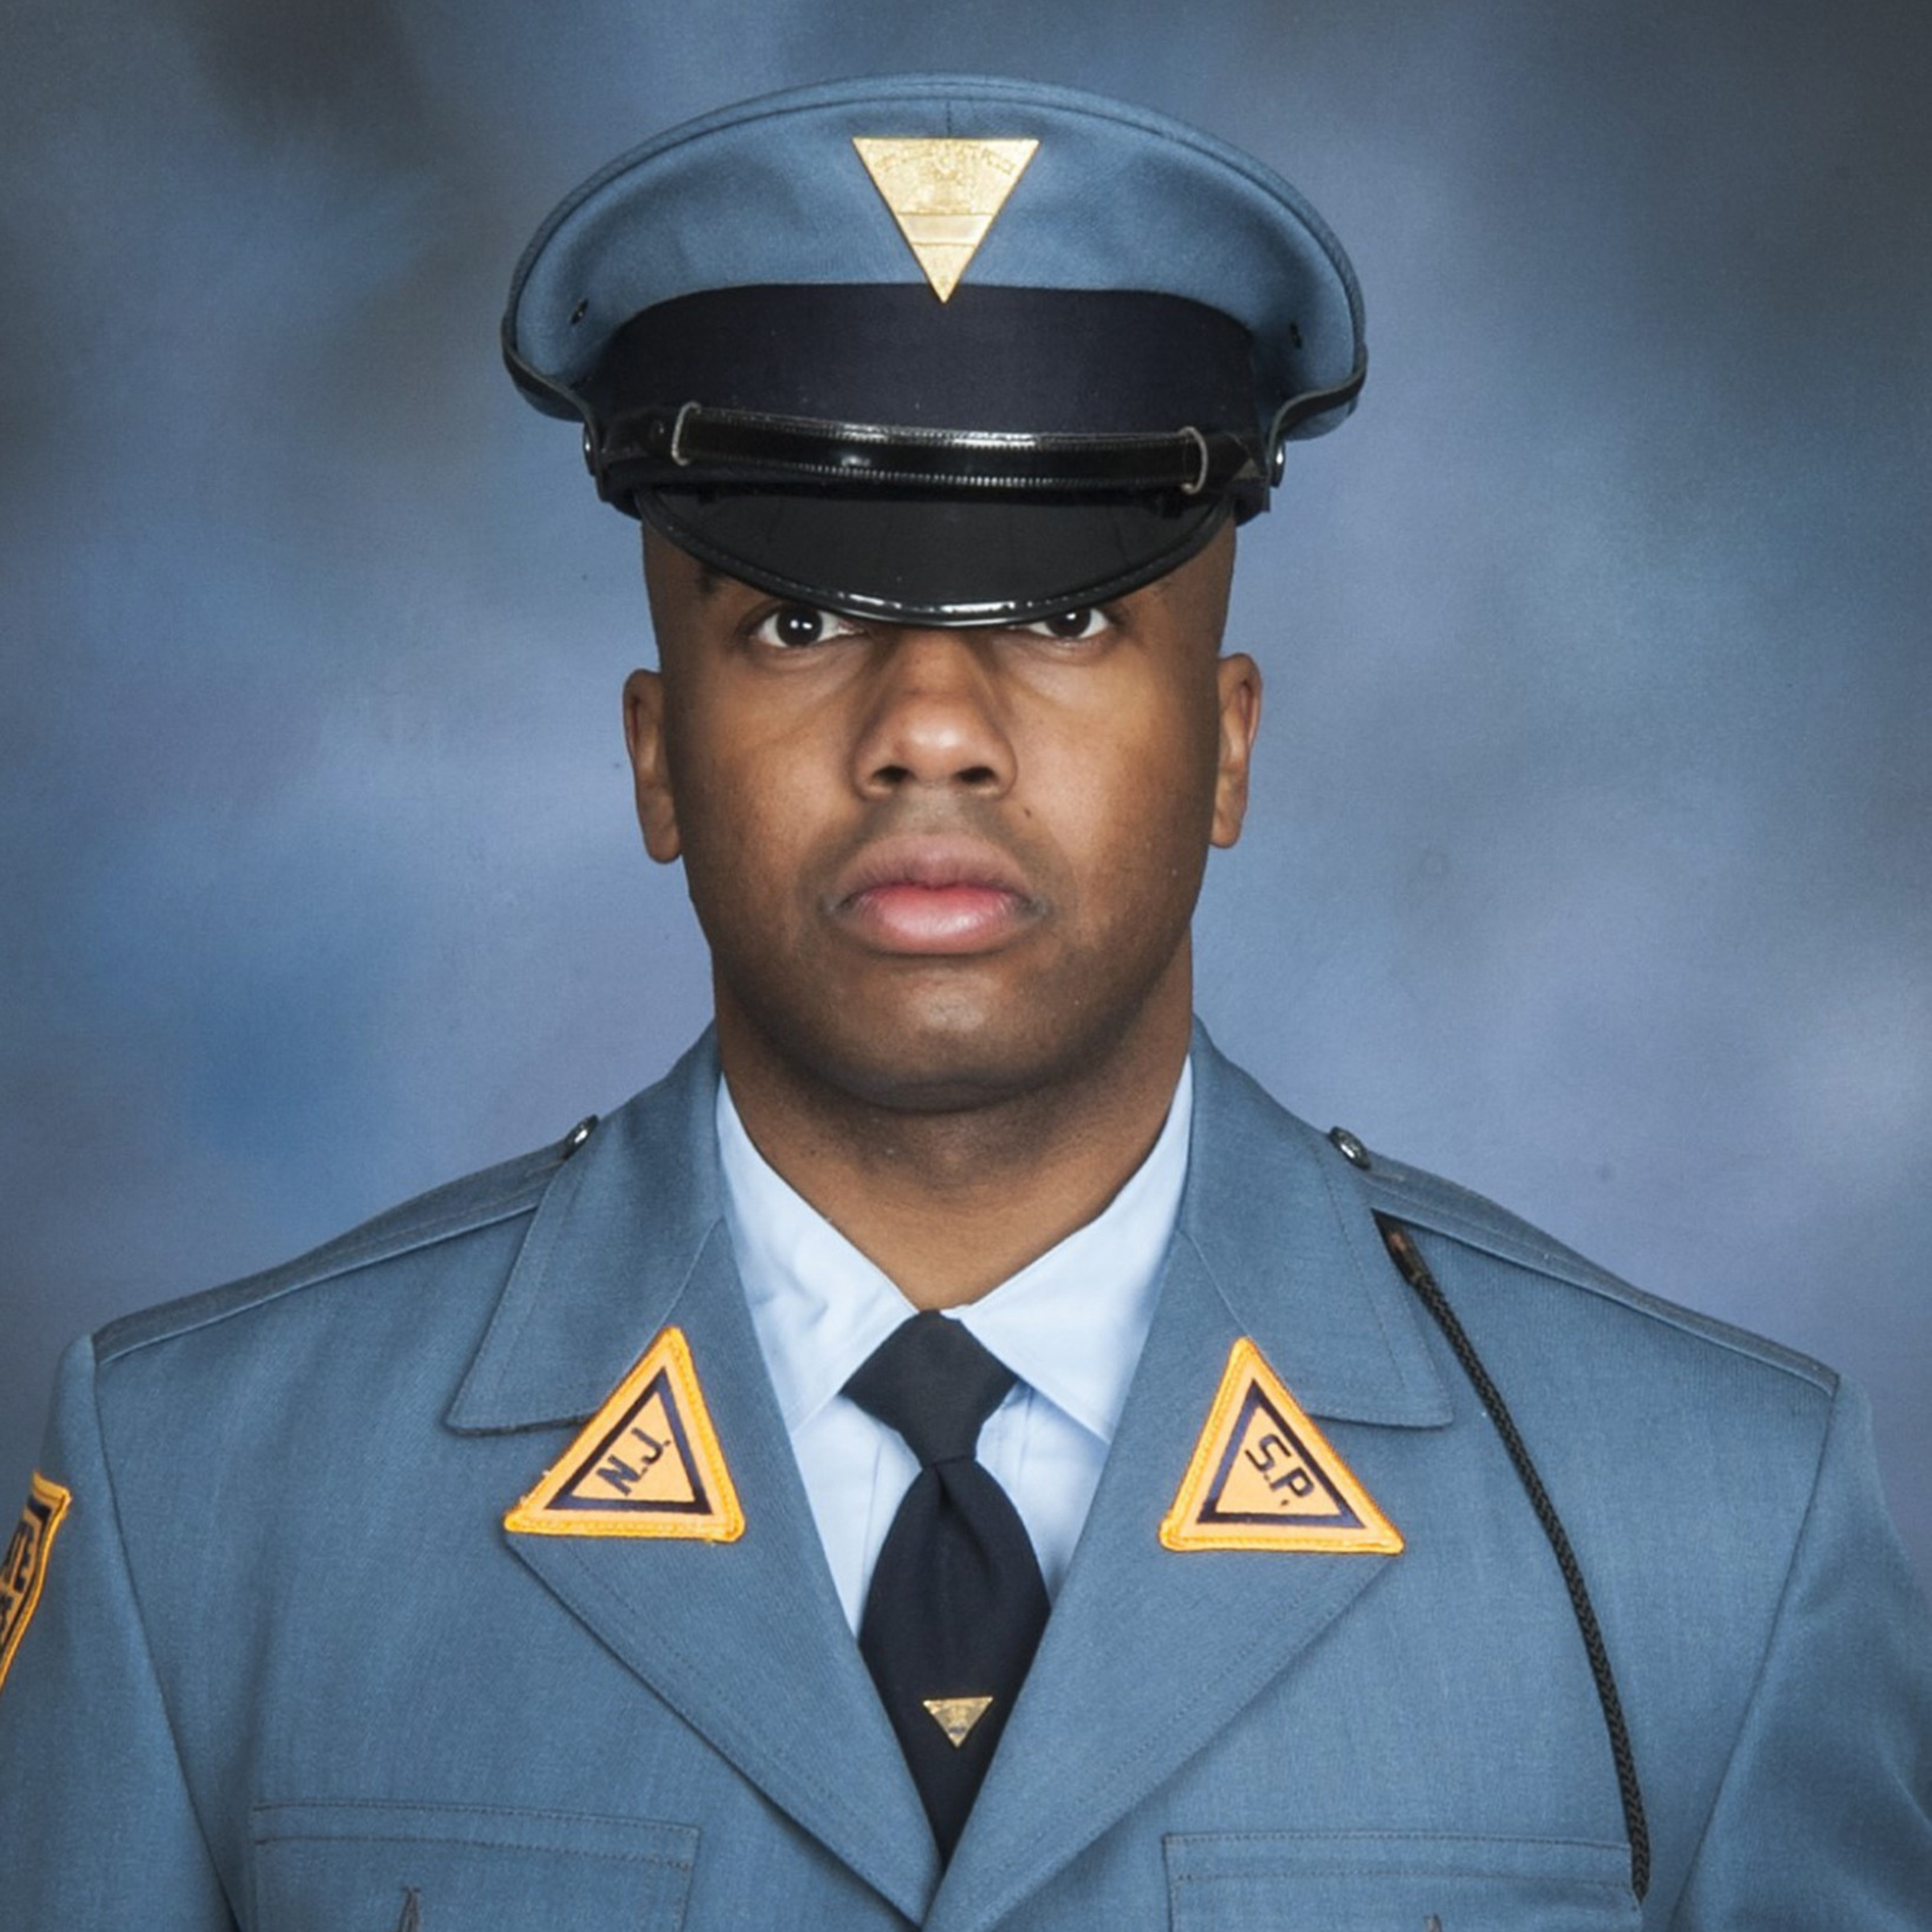 NJ state trooper dies during training for elite emergency response unit, officials say